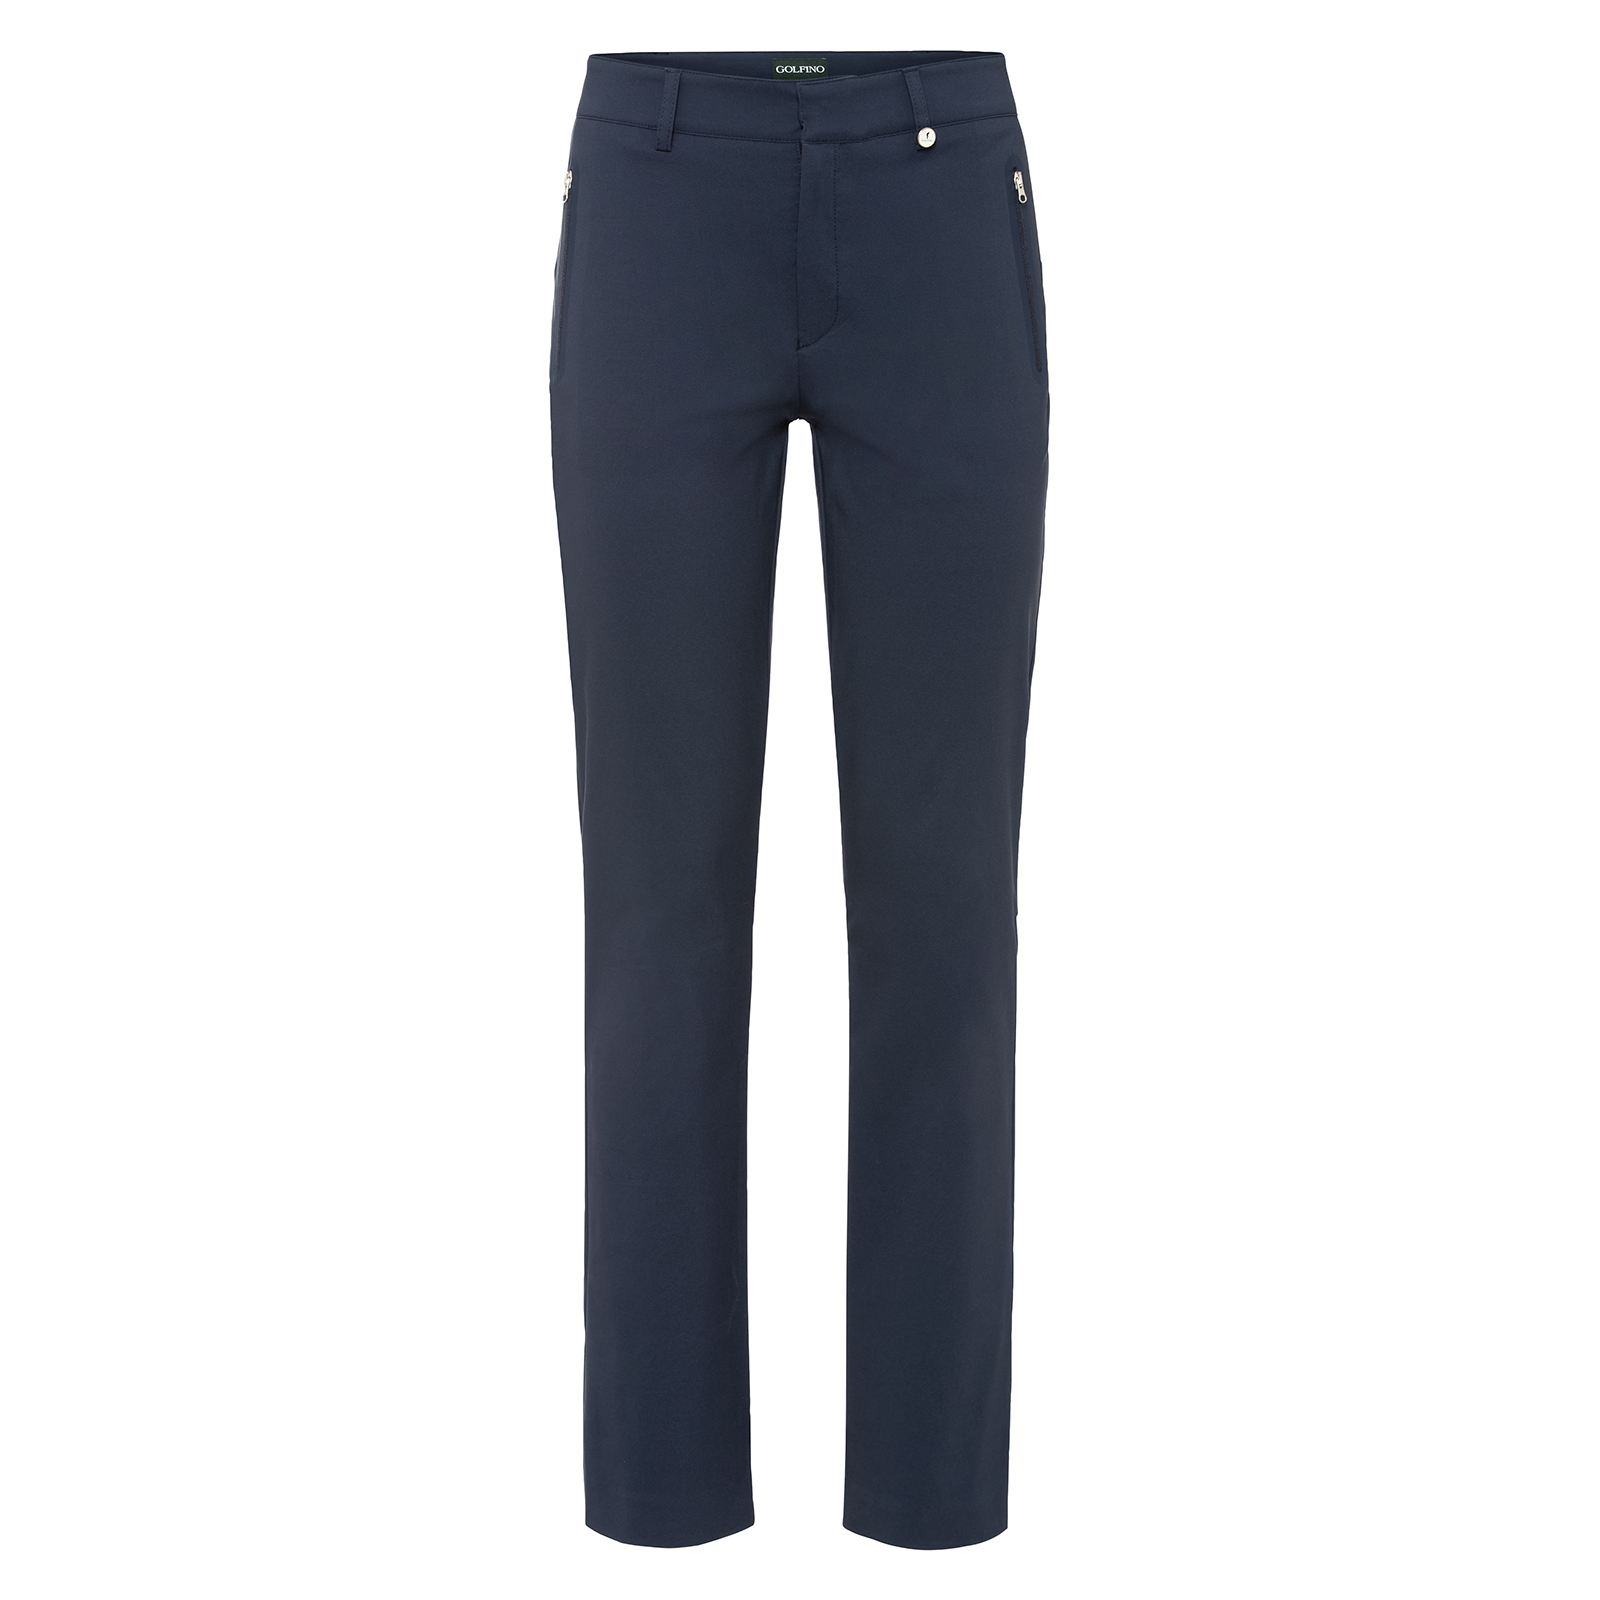 Ladies’ warm 7/8 golf trousers in Techno Stretch 